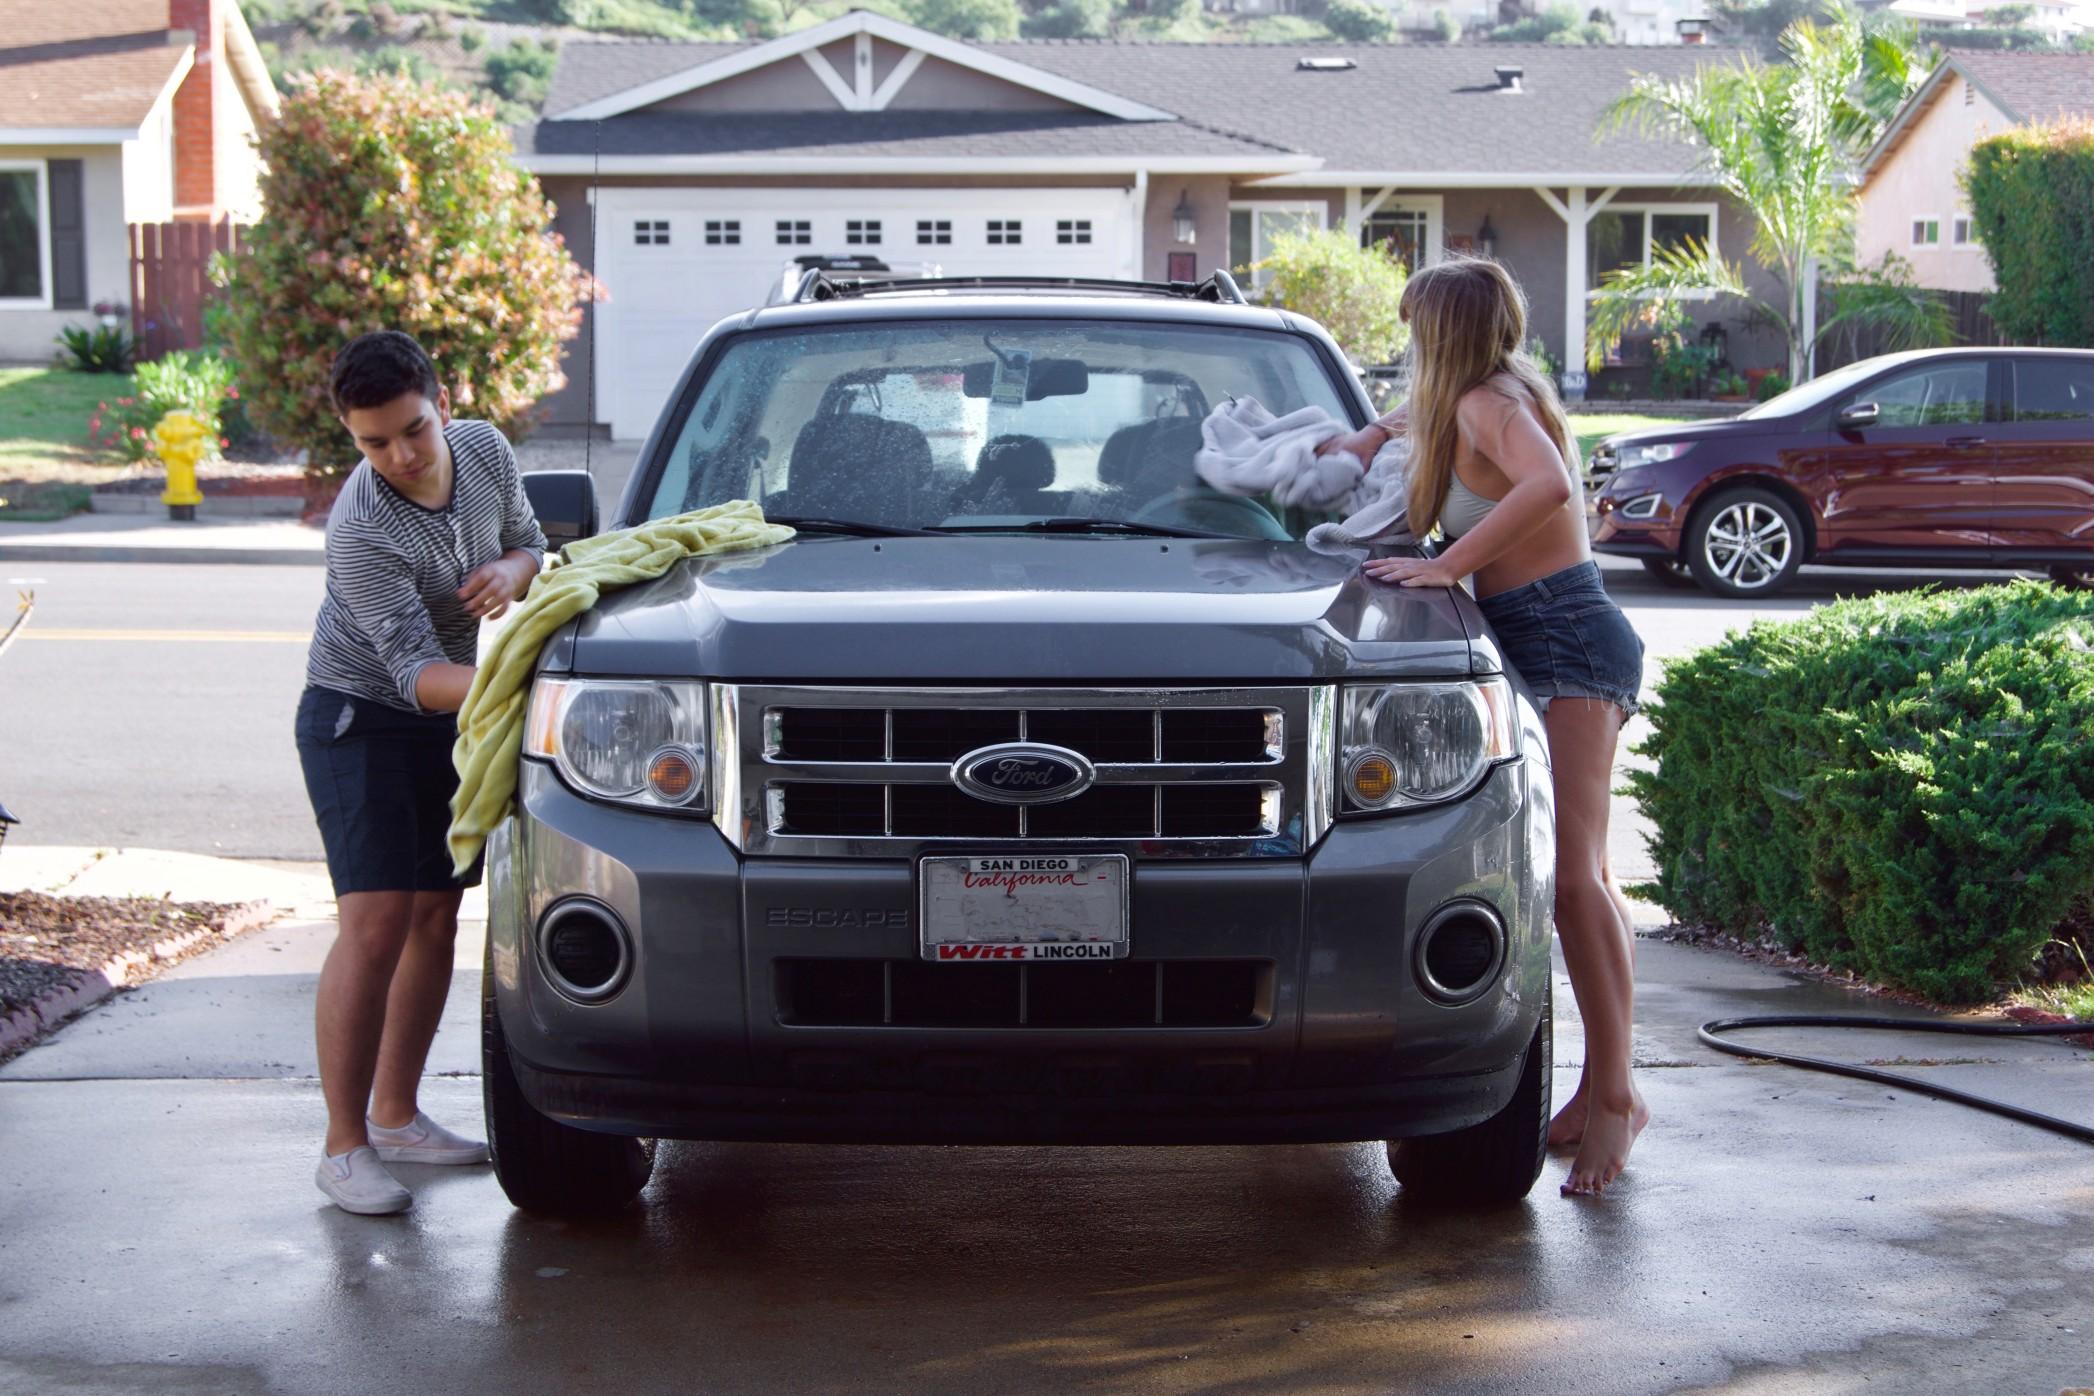 Two people washing their car in a driveway.